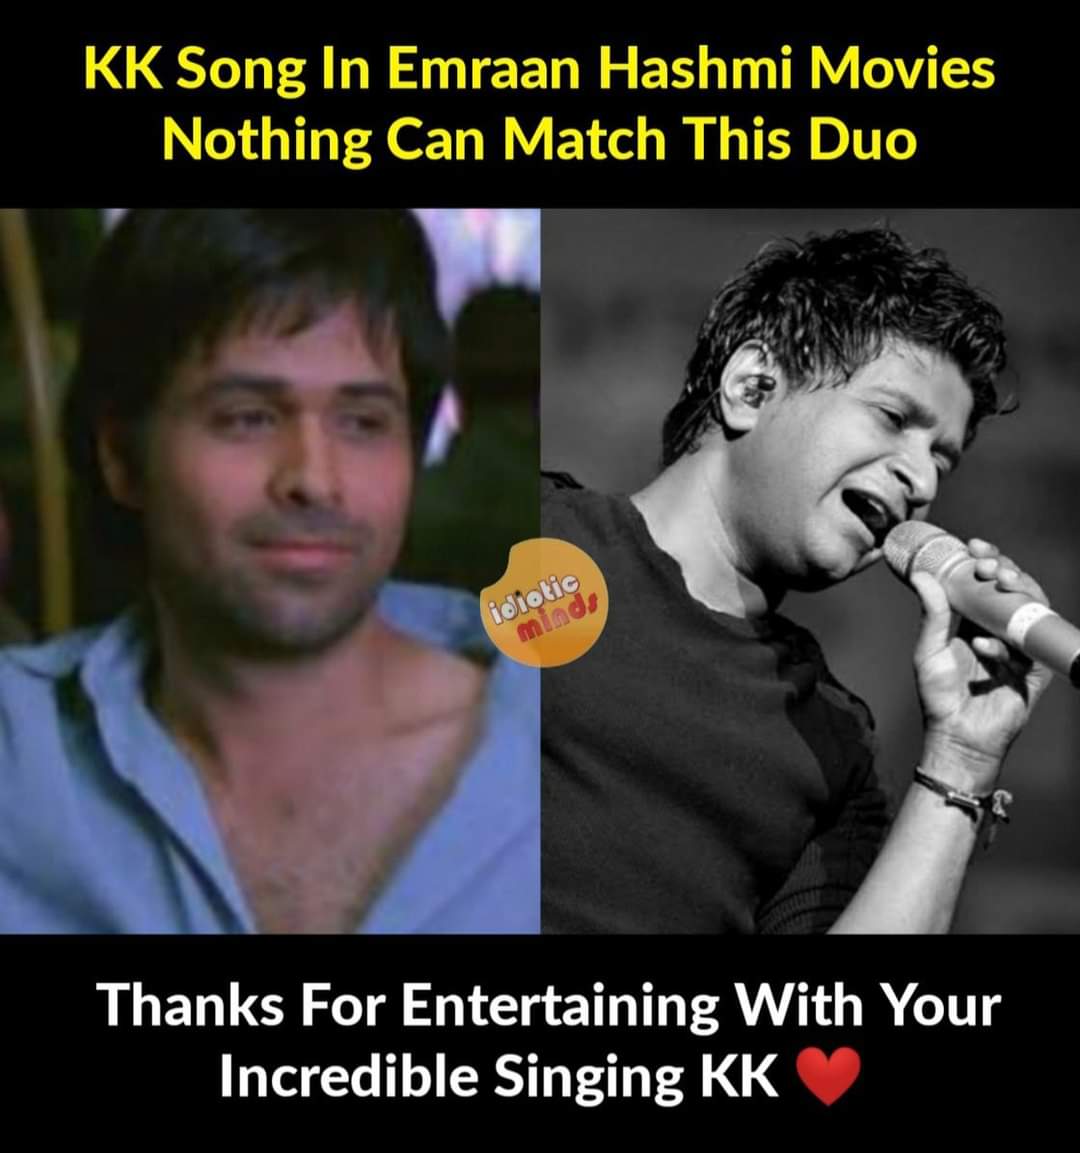 Emraan Hashmi On Twitter A Voice And Talent Like No Other They Don